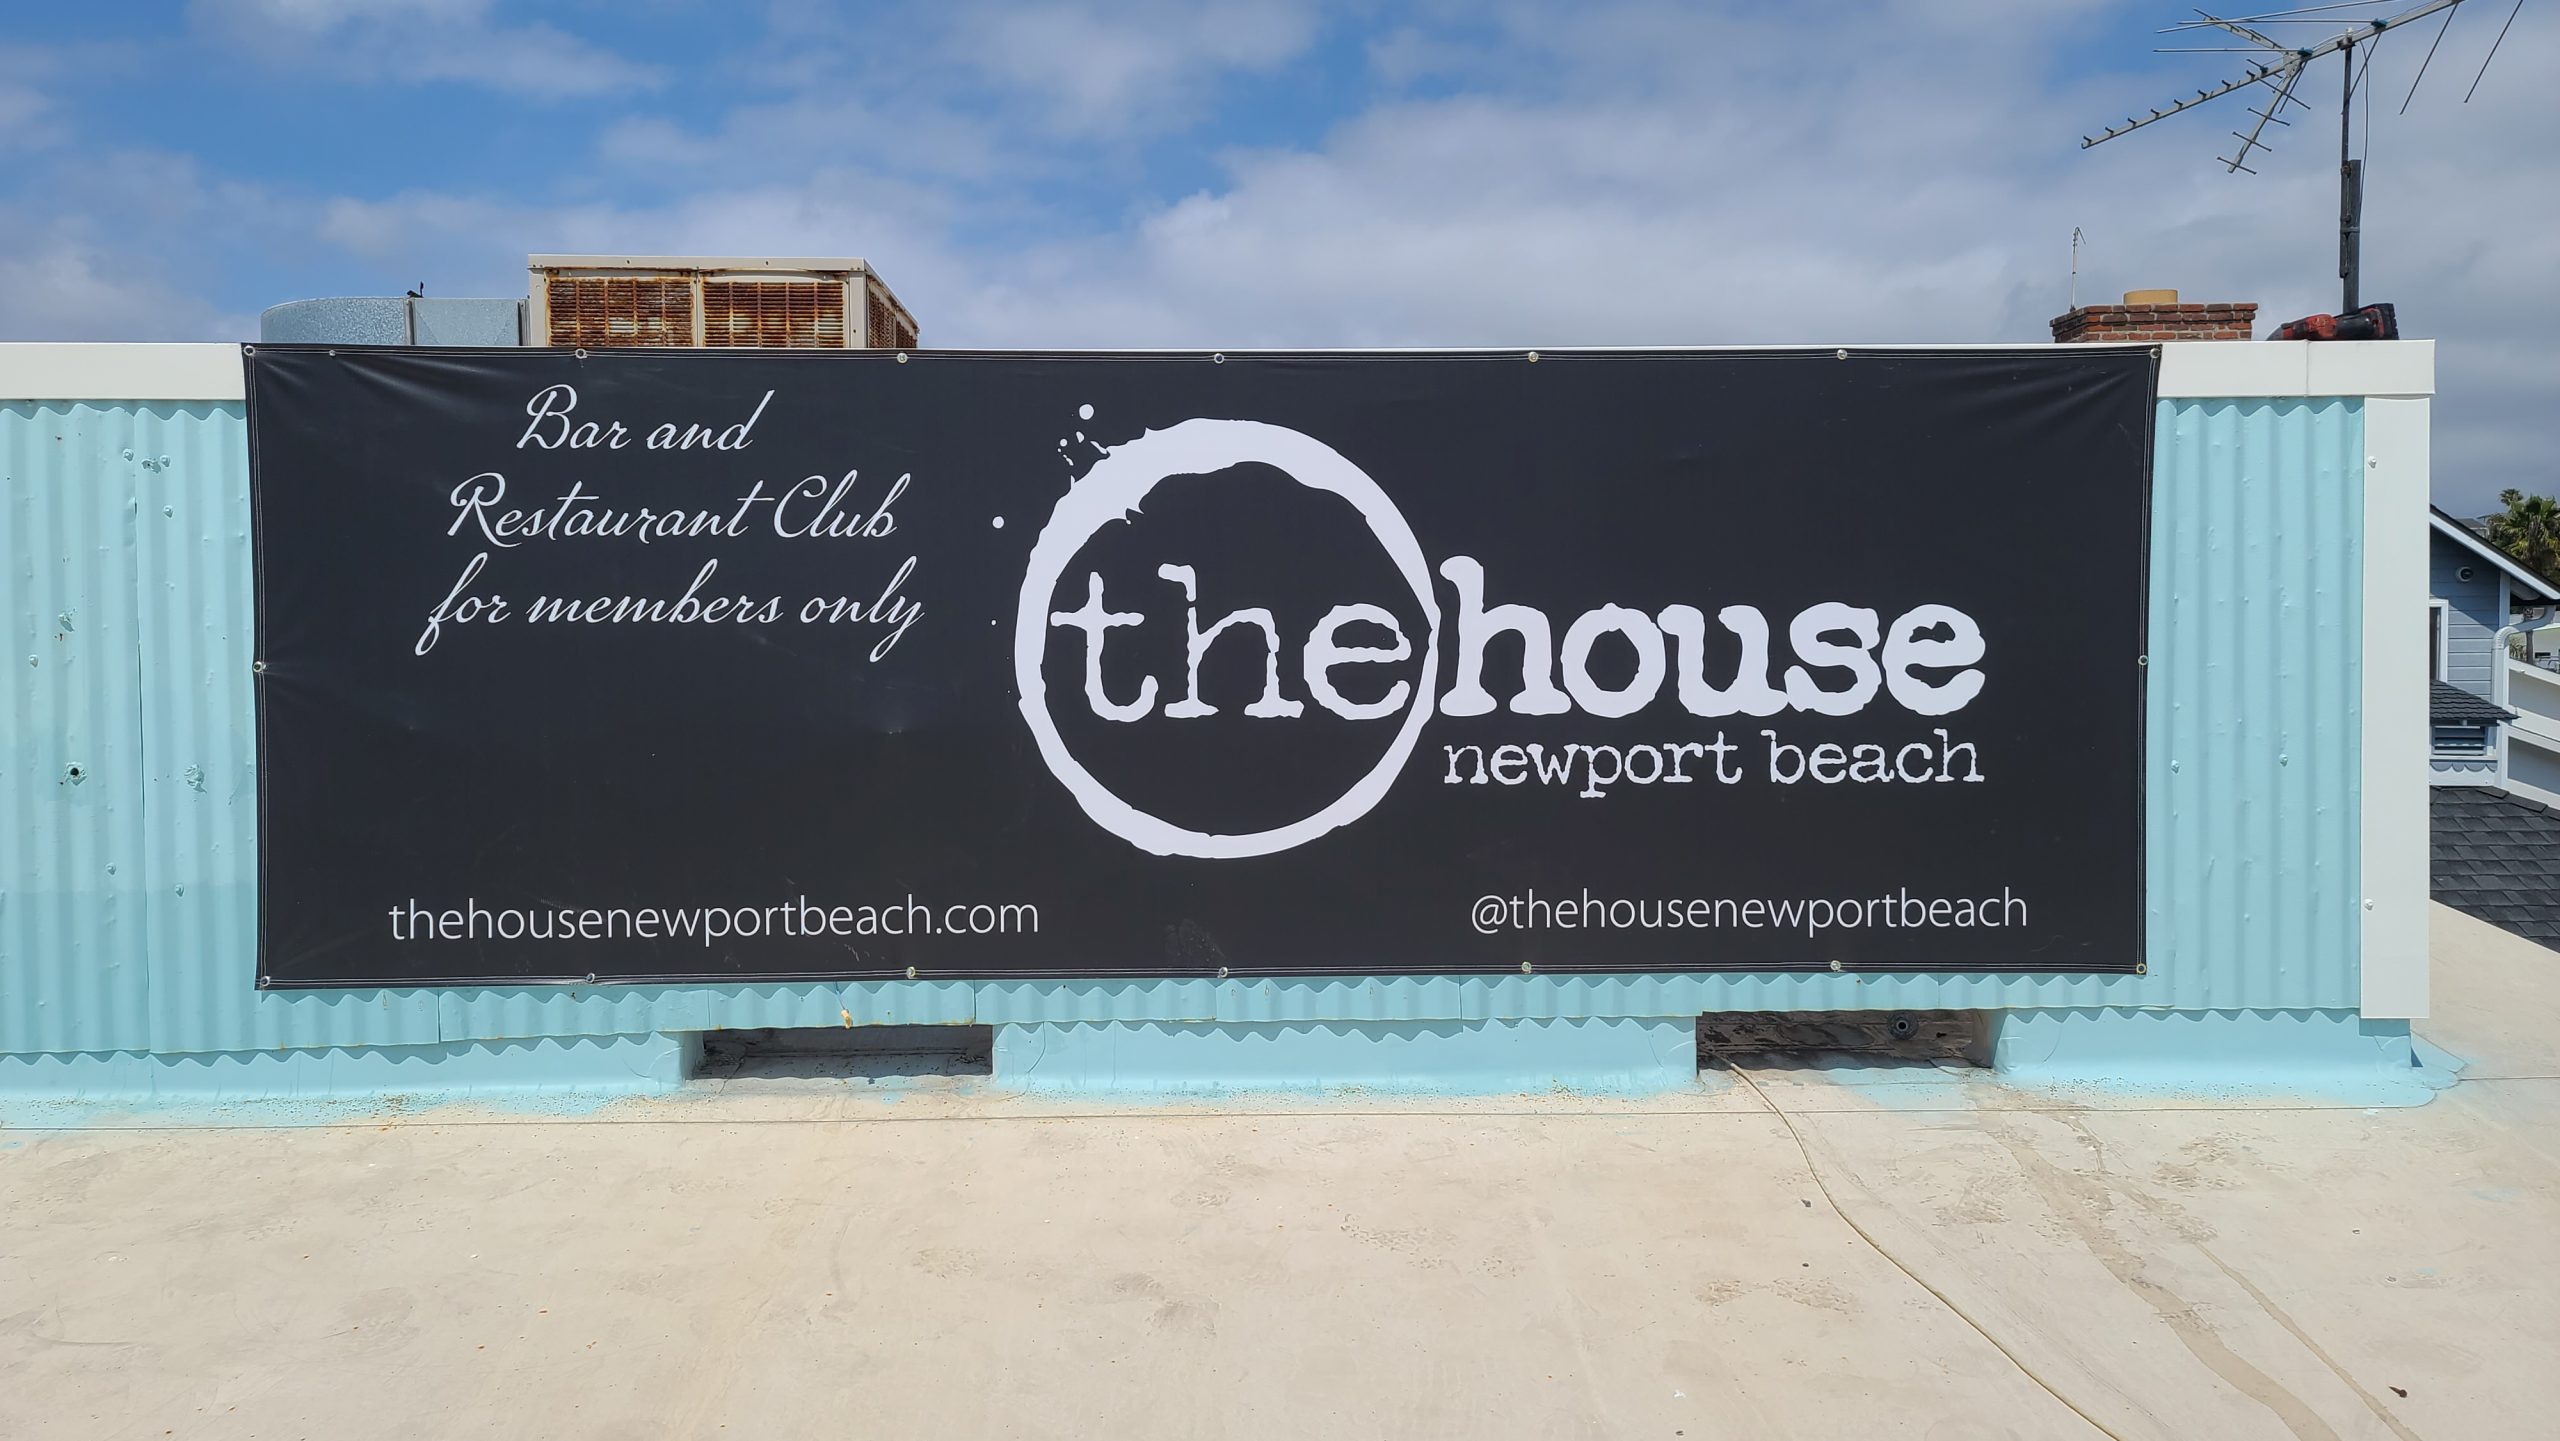 This is our exterior custom banner for The House Newport Beach, part of their restaurant banner sign package.